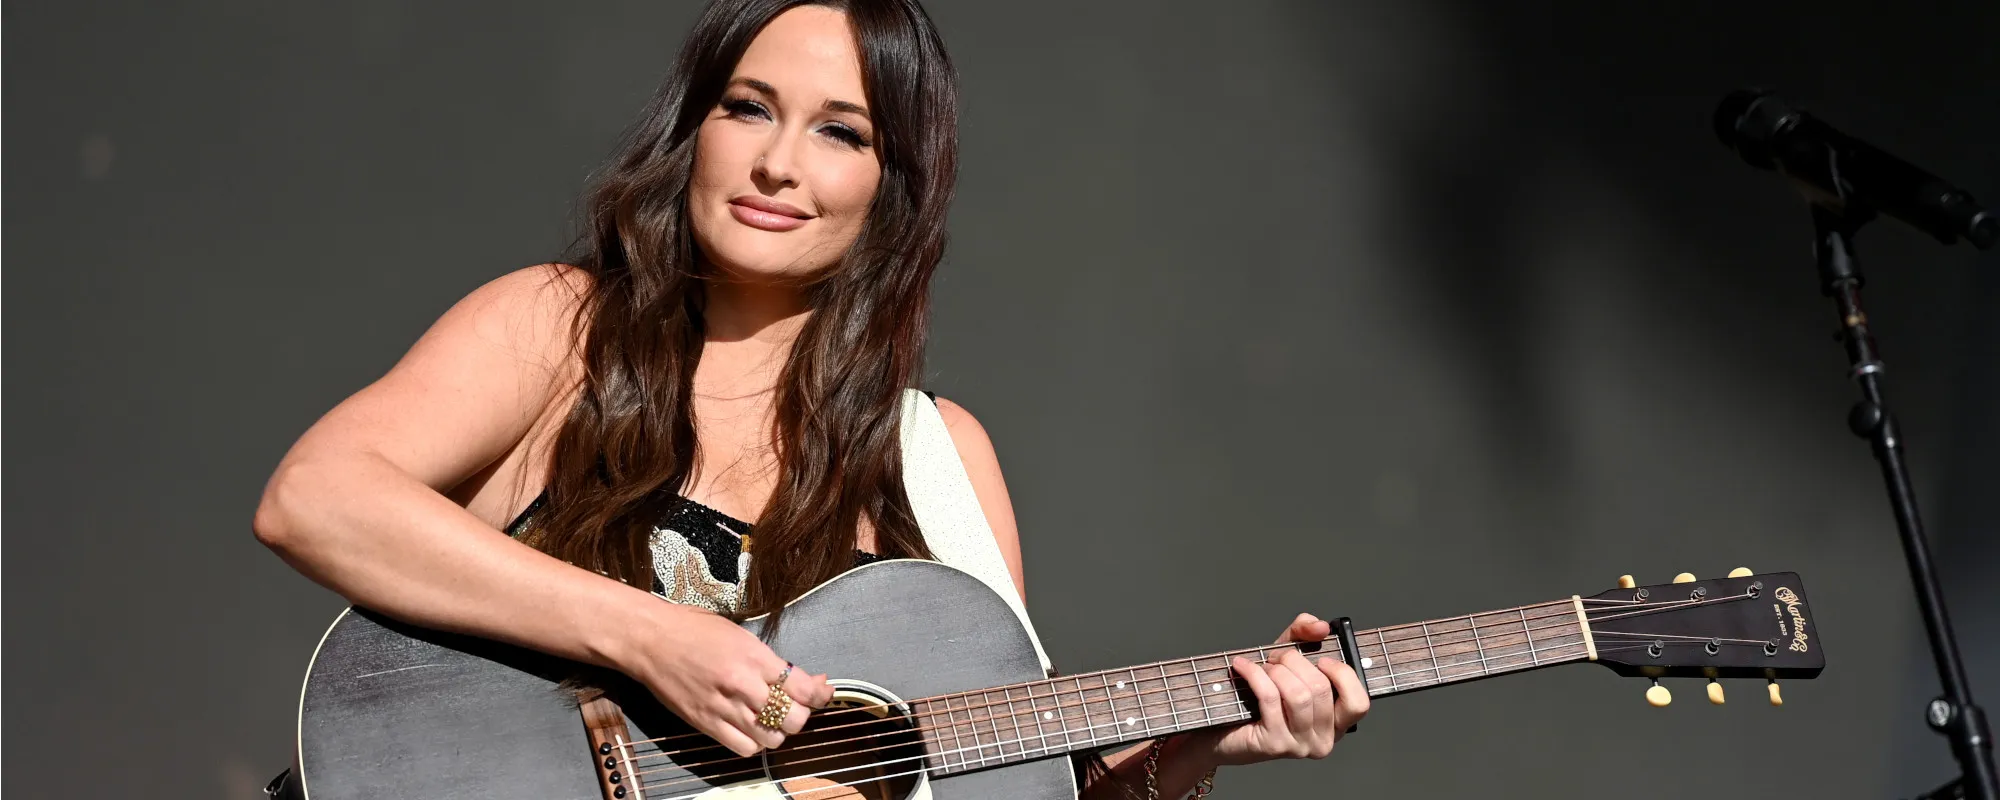 Behind the Meaning of “Too Good to be True” by Kacey Musgraves